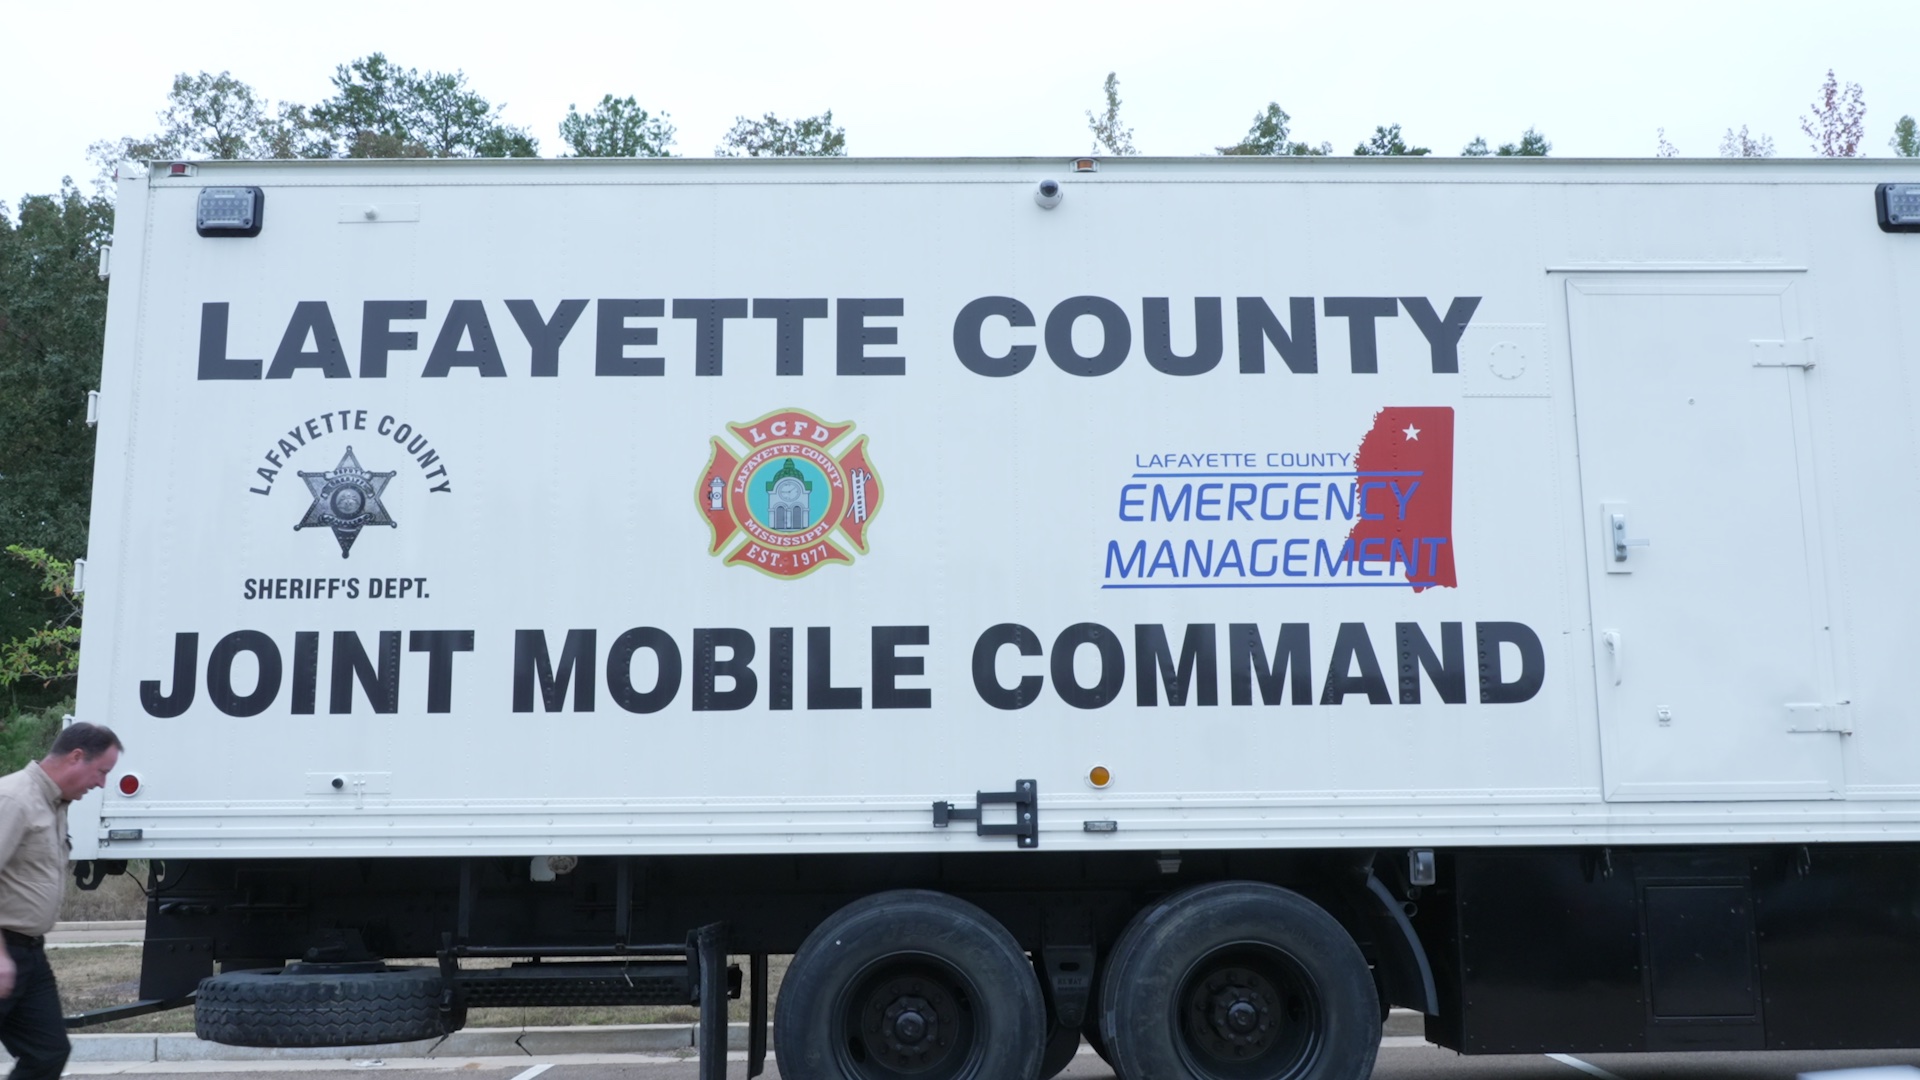 Lafayette County joint mobile command truck